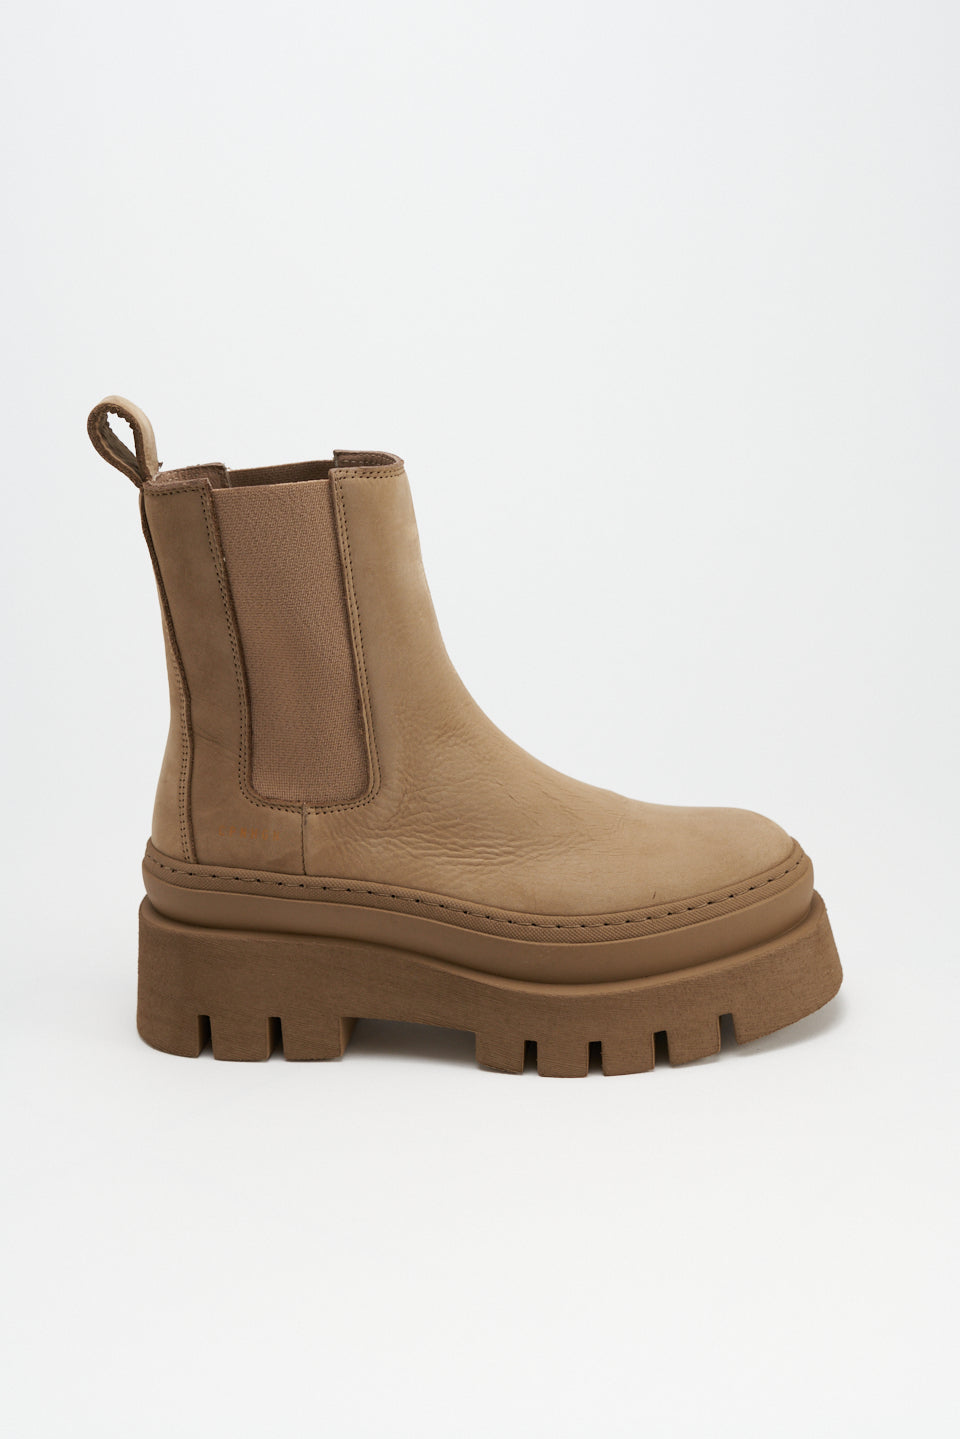 Nabuc Taupe Chelsea Boots CPH686_TAUPE -7